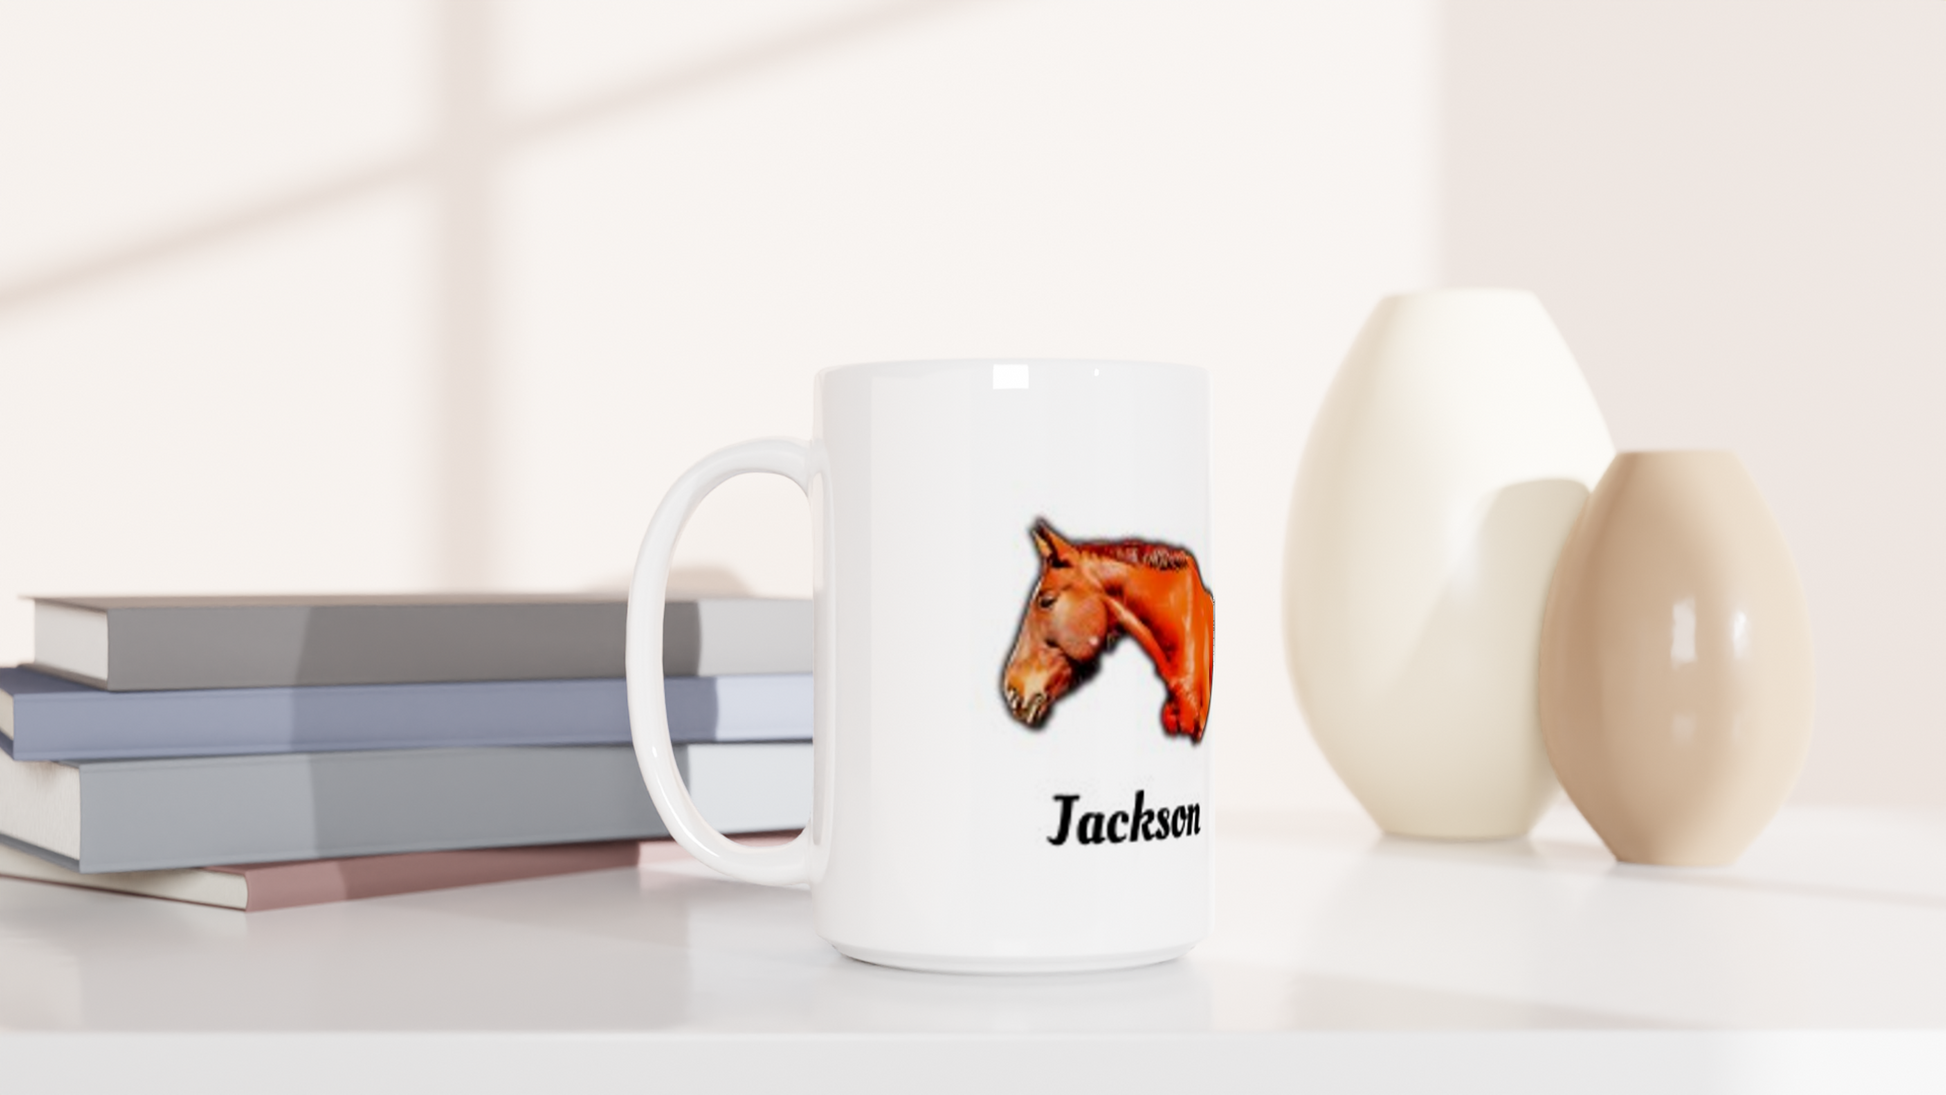 Hand Drawn Horse || 15oz Ceramic Mug - Comic - Personalized; Personalized with your horse